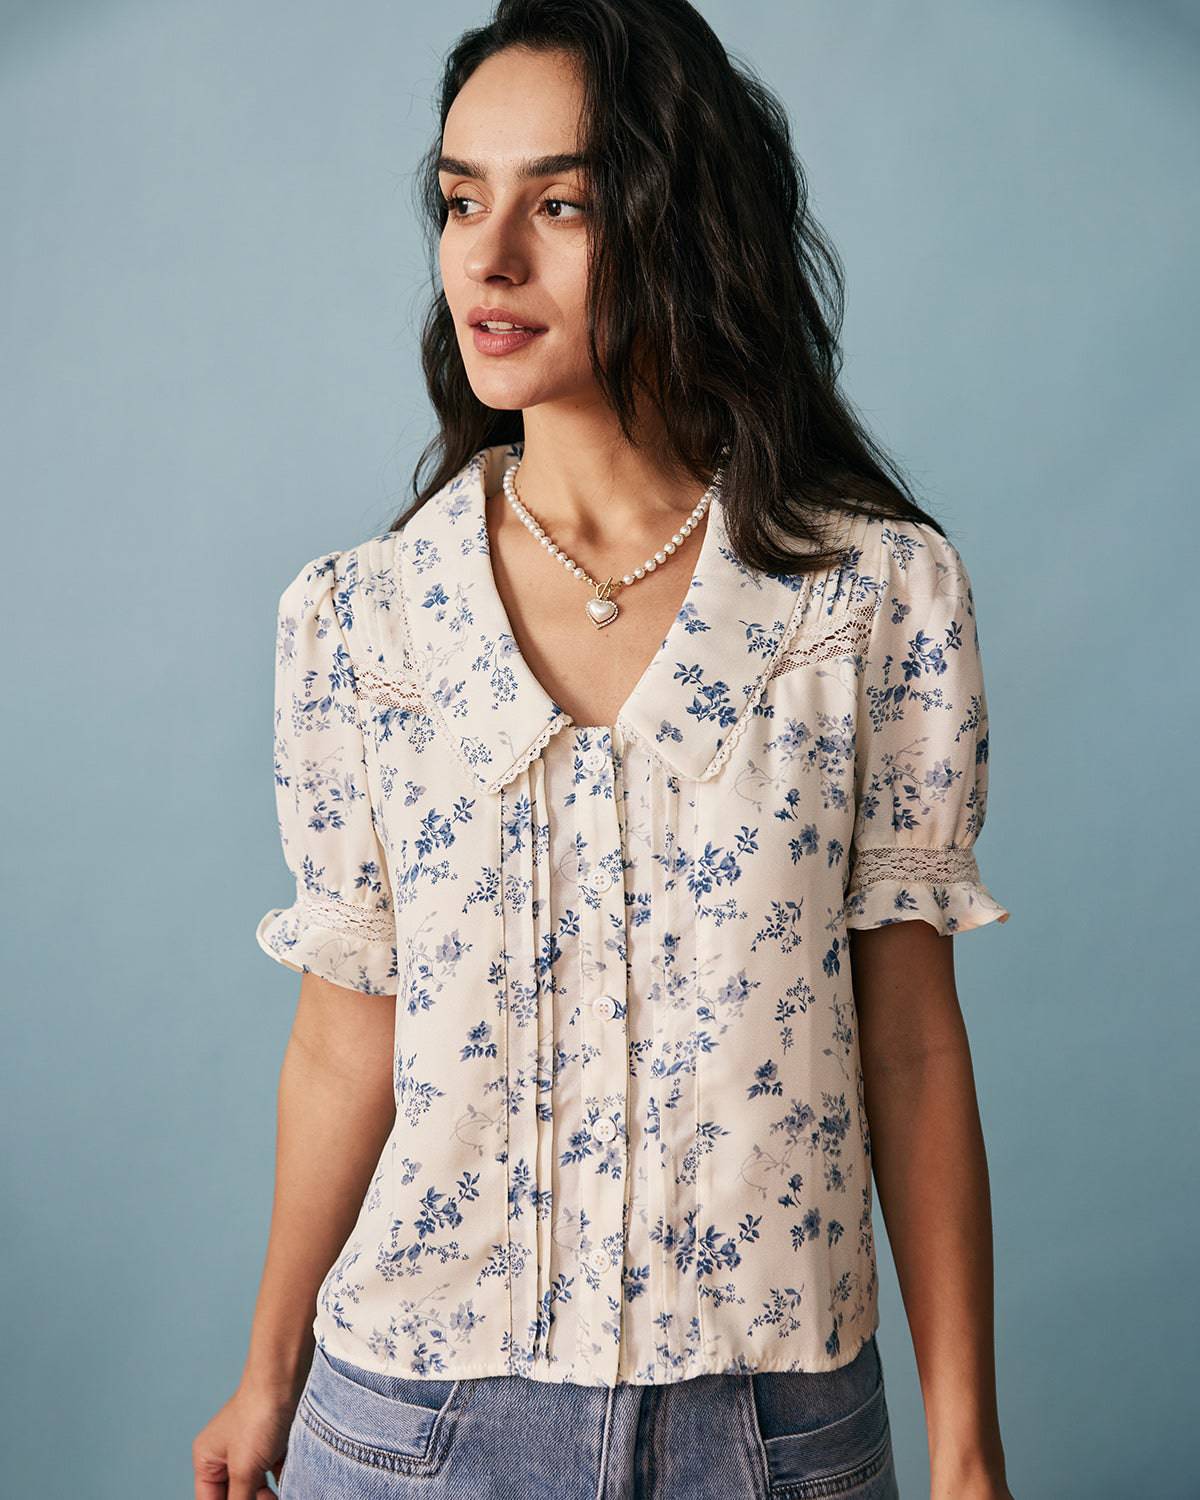 The Lace Spliced Pleated Floral Shirt - Floral Print Short Sleeve ...